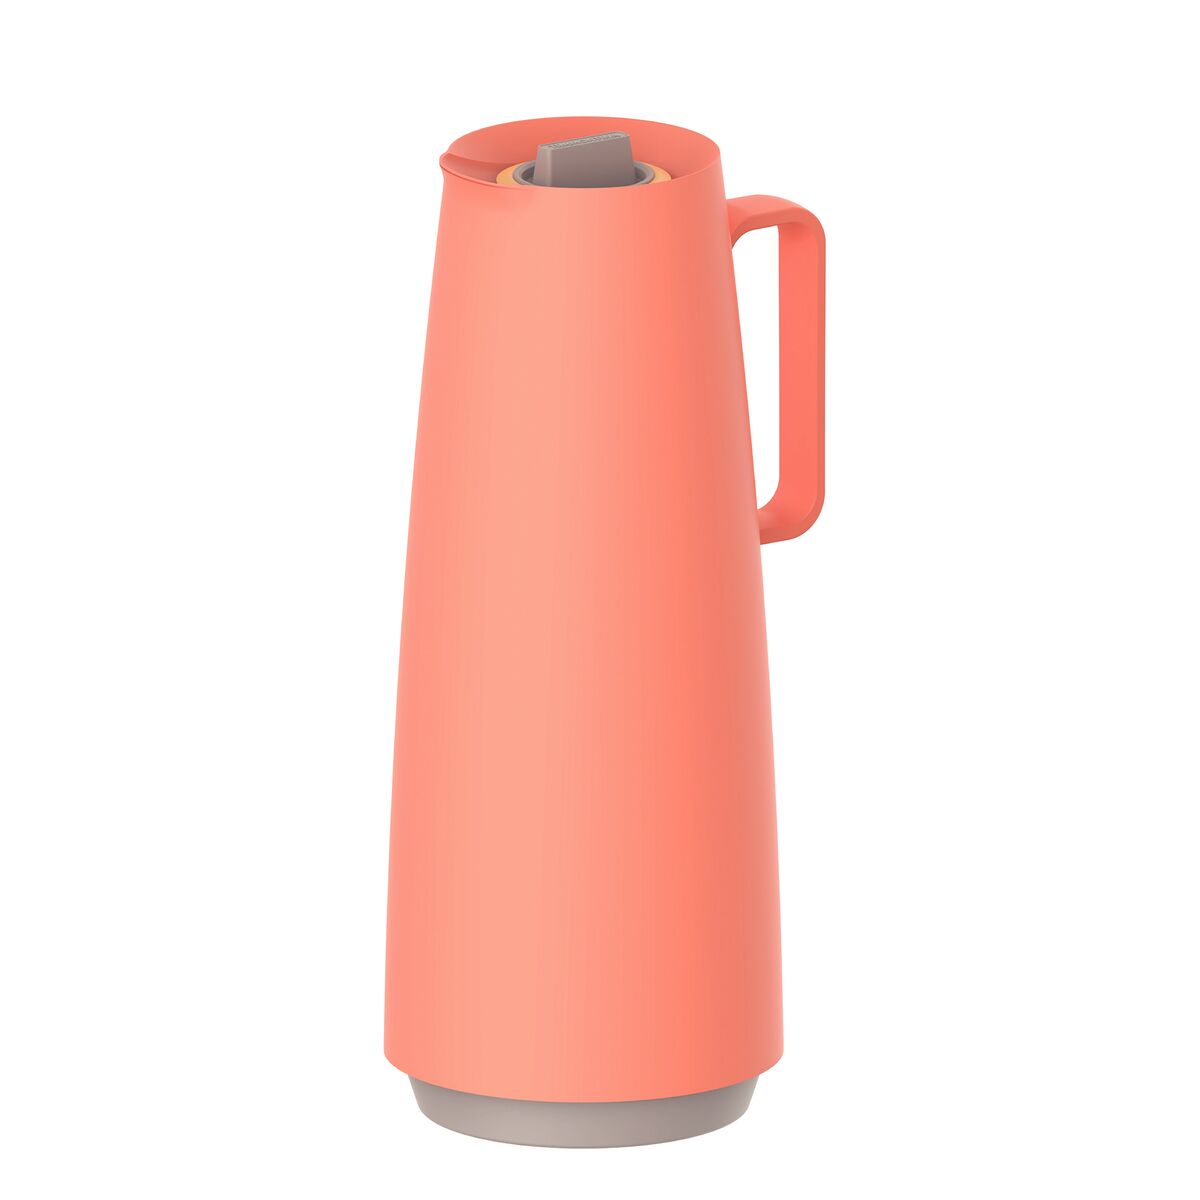 Tramontina Exata Coral Plastic Thermal Flask with Glass Liner, 1 L